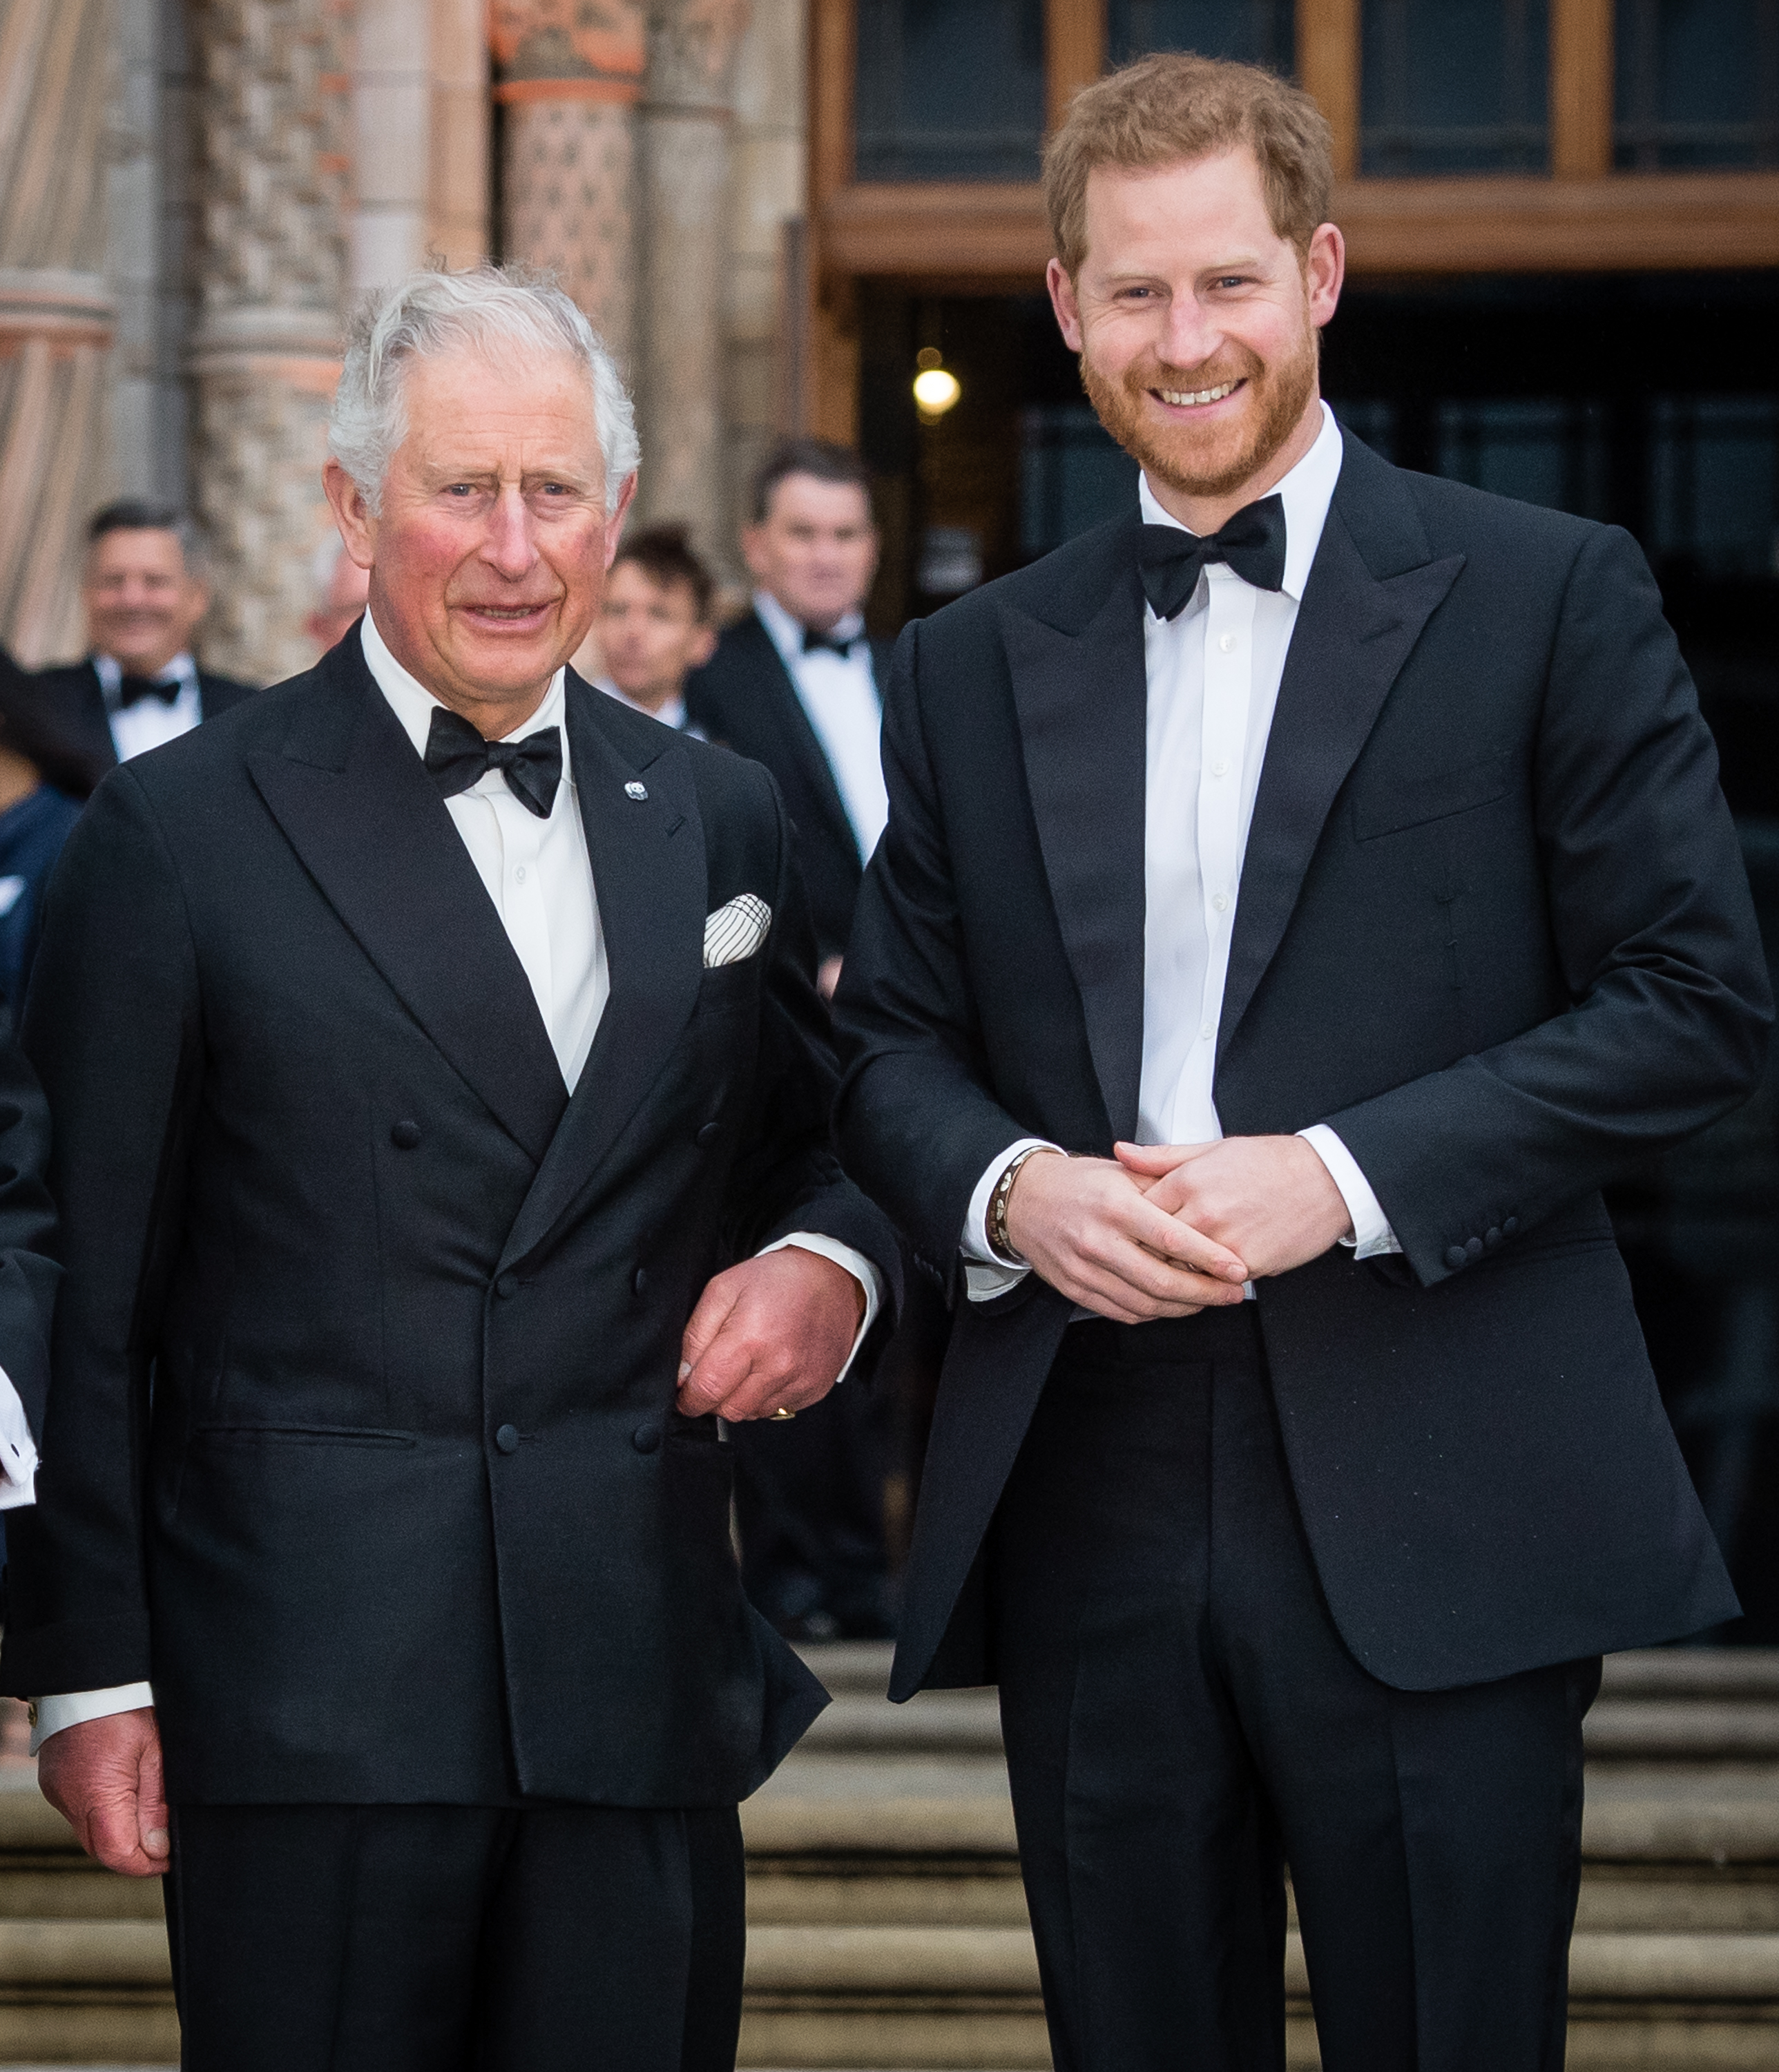 King Charles III and Prince Harry at the Natural History Museum in London, England on April 4, 2019 | Source: Getty Images